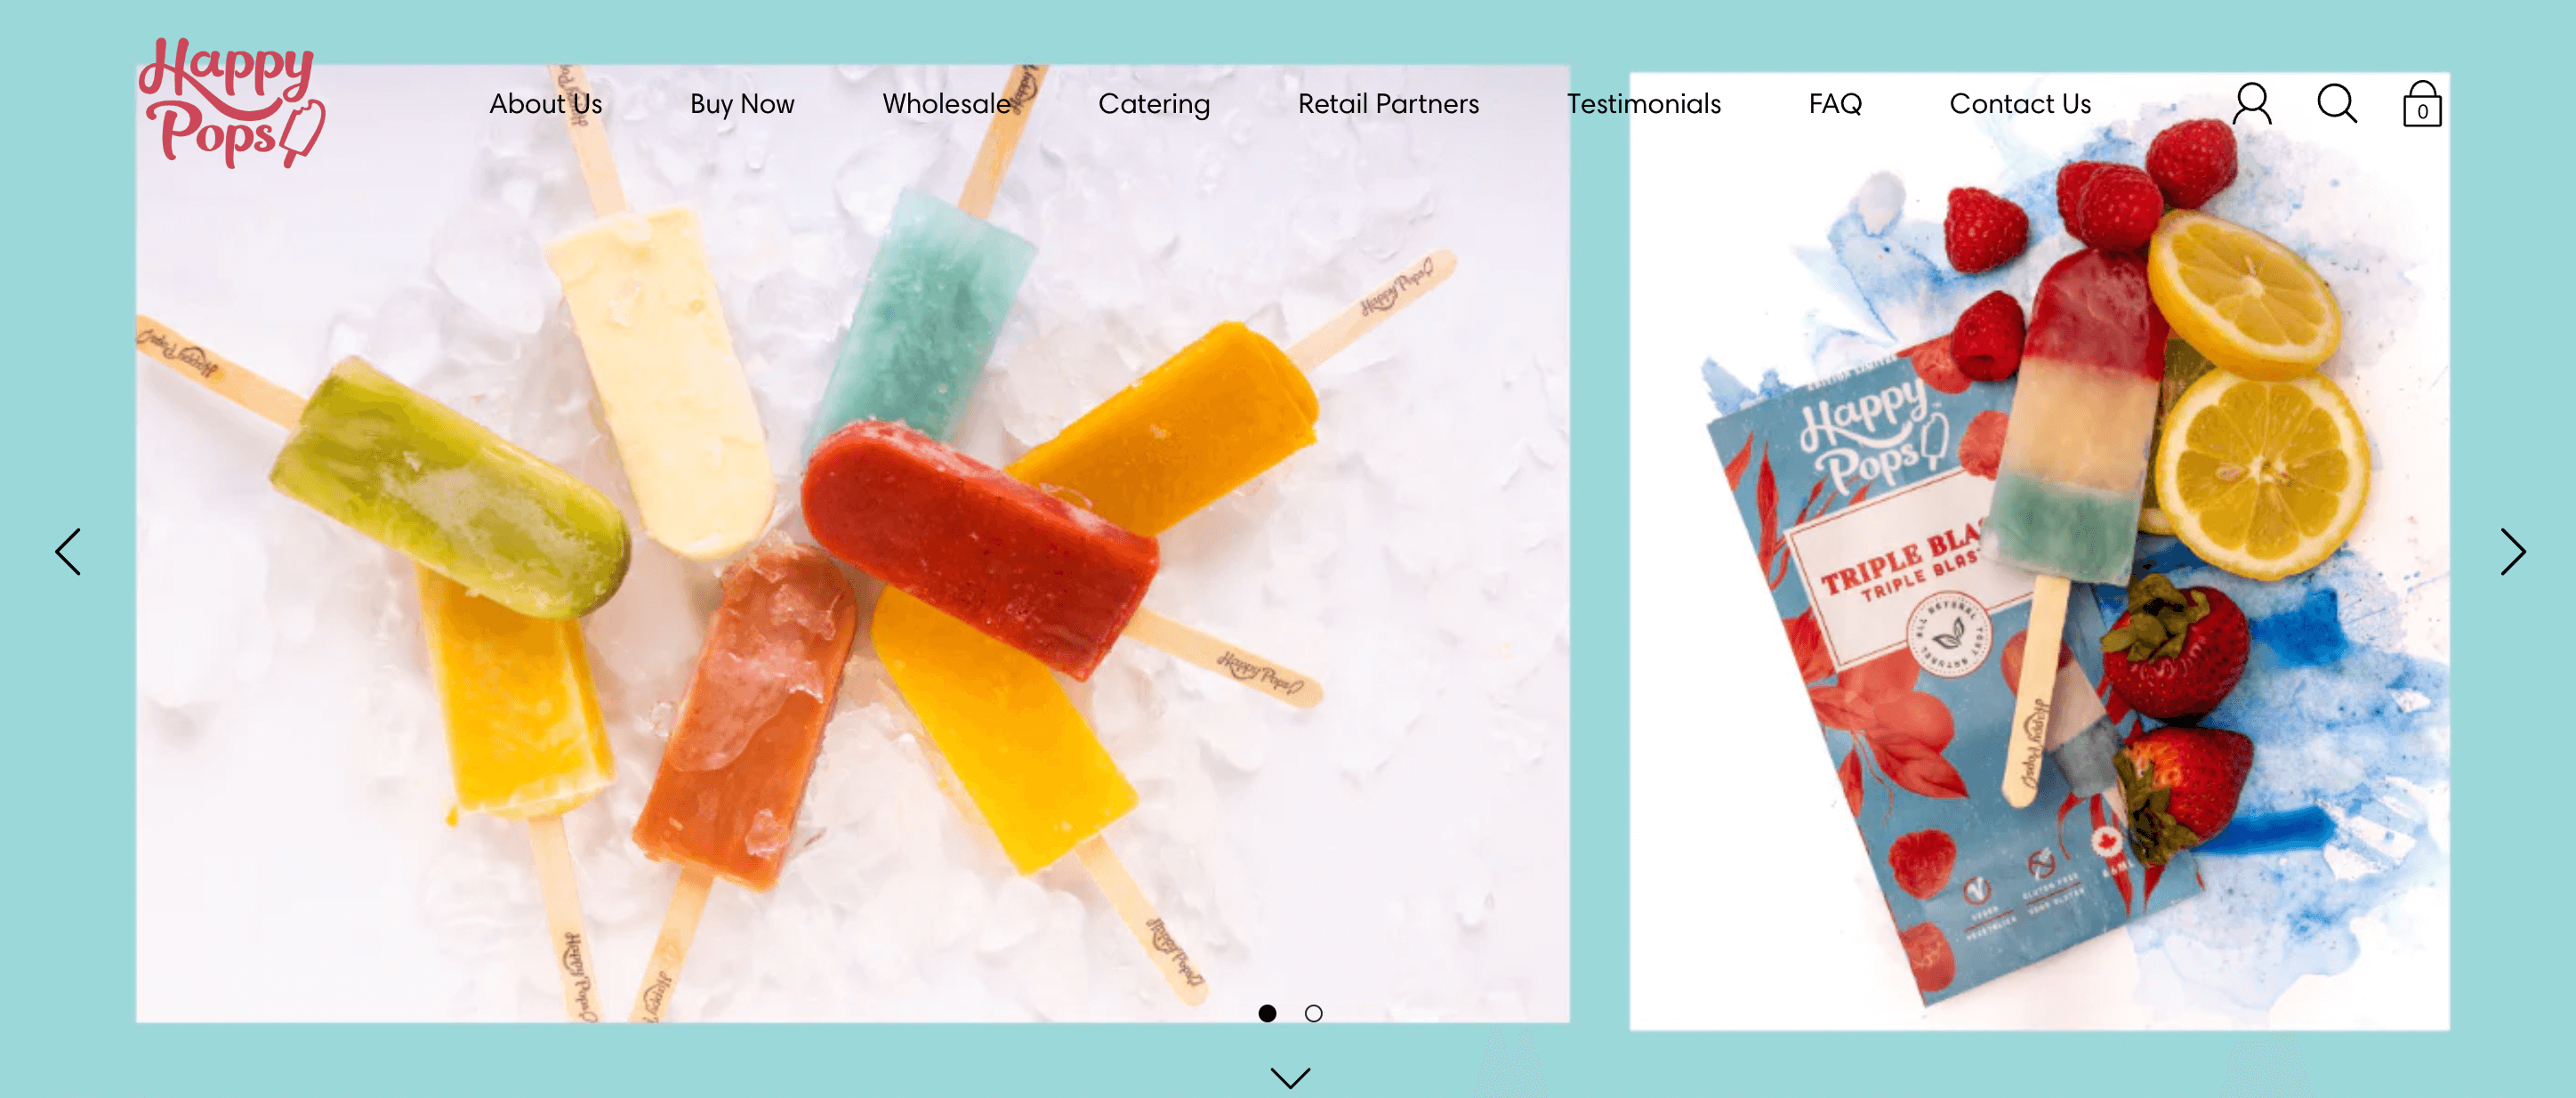 A screenshot of Happy Pops homepage showing images of its colorful ice pops. 